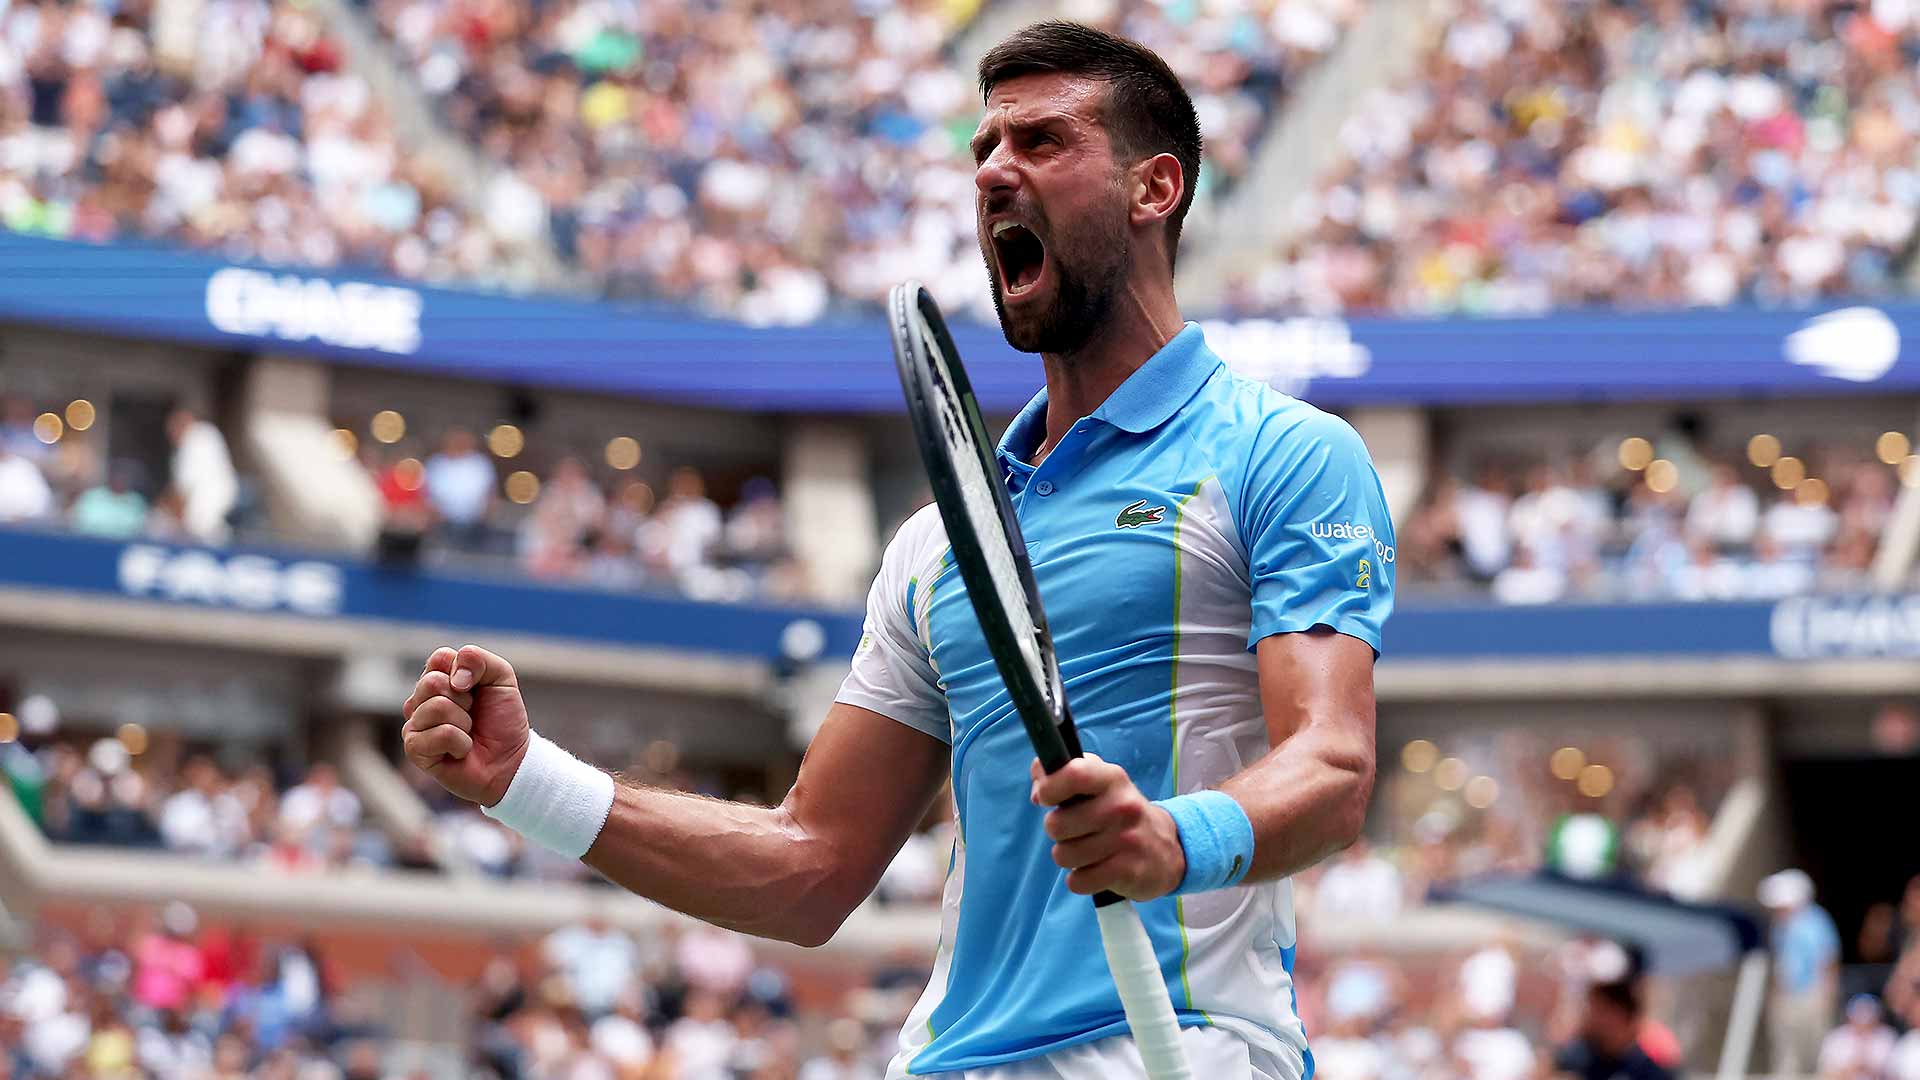 Novak Djokovic is one win from a record-extending 10th US Open final.